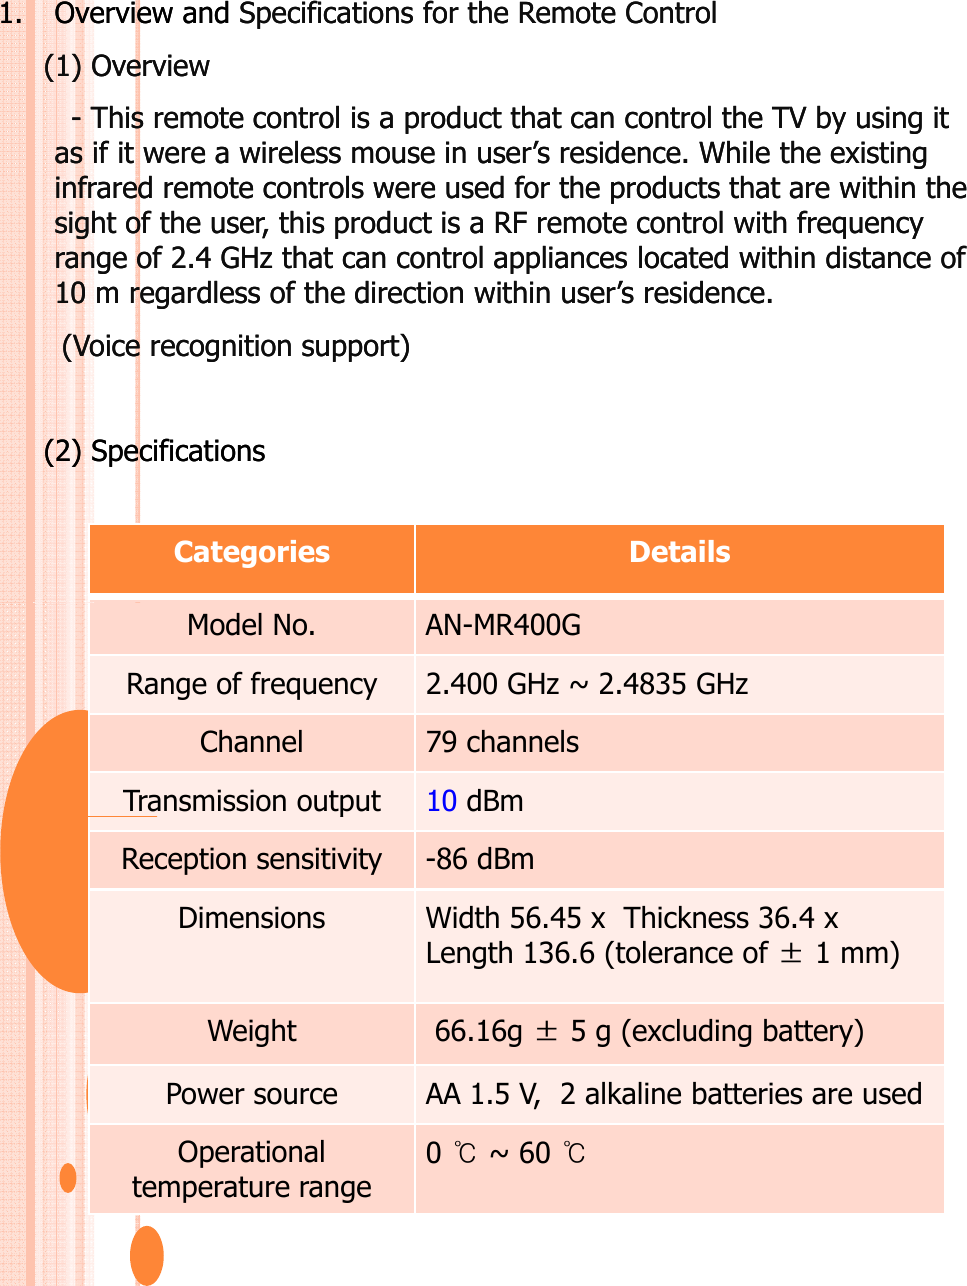 1.1. Overview and Overview and Specifications for the Remote ControlSpecifications for the Remote Control(1) Overview(1) Overview-- This remote control is a product that can control the TV by using it This remote control is a product that can control the TV by using it as if it were a wireless mouse in user’s residence. While the existing  as if it were a wireless mouse in user’s residence. While the existing  infrared remote controls were used for the products that are within the infrared remote controls were used for the products that are within the sight of the user, this product is a RF remote control with frequency sight of the user, this product is a RF remote control with frequency range of 2.4 GHz that can control appliances located within distance of range of 2.4 GHz that can control appliances located within distance of 10 m regardless of the direction within user’s residence. 10 m regardless of the direction within user’s residence. (Voice recognition support)(Voice recognition support)(2) Specifications(2) SpecificationsCategories DetailsModel No. AN-MR400GRange of frequency 2.400 GHz ~ 2.4835 GHzChannel 79 channelsTransmission output 10 dBmpReception sensitivity -86 dBmDimensions Width 56.45 x Thickness 36.4 x Length 136.6 (tolerance of ±1 mm) Weight66 16g±5g(excludingbattery)Weight66.16g ±5 g (excludingbattery)Power source AA 1.5 V,  2 alkaline batteries are usedOperational temperature range 0 ~ 60 